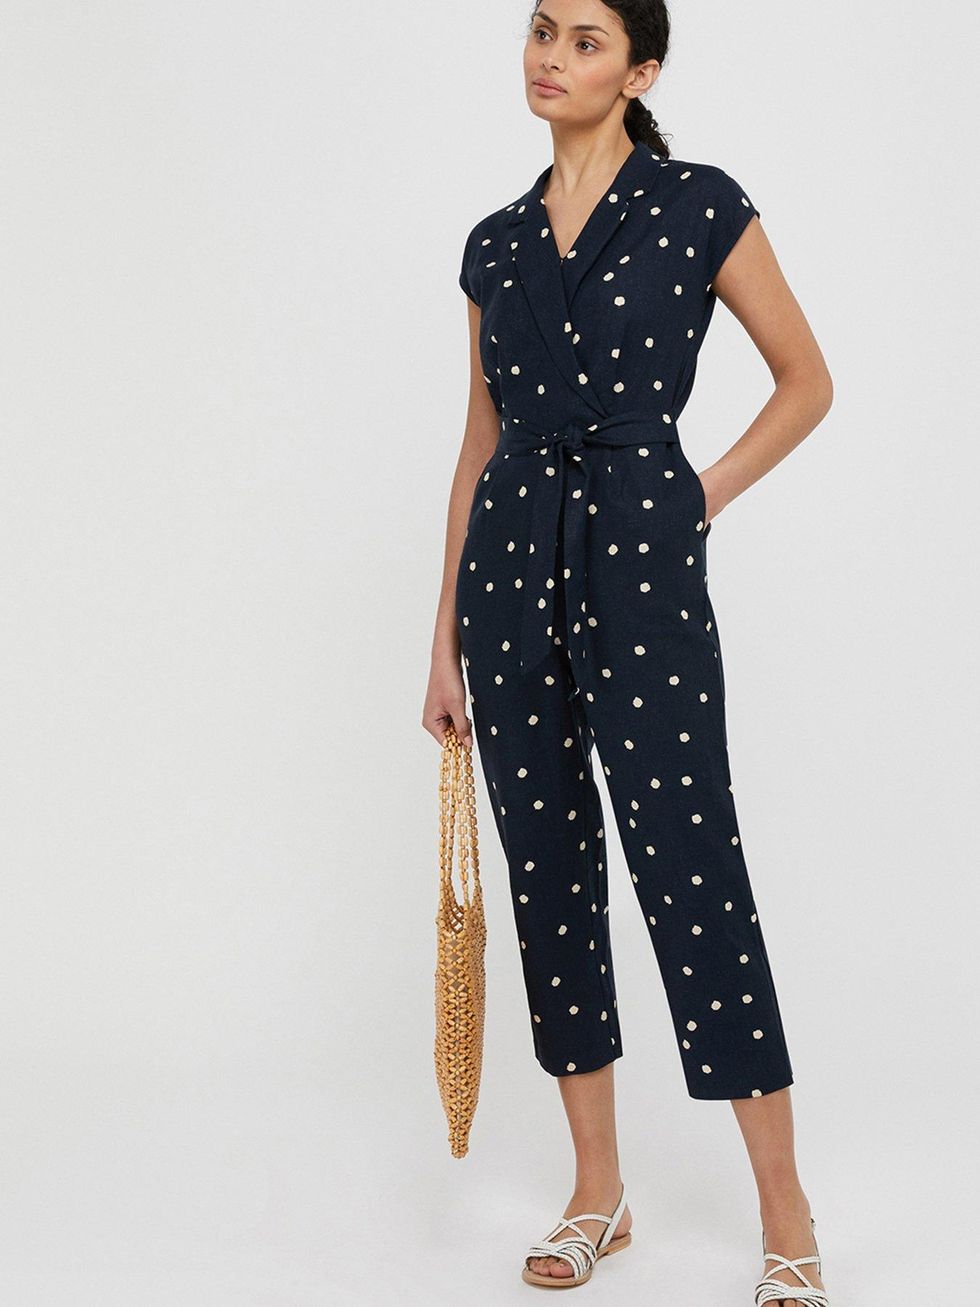 Andrea McLean is super-chic in gorgeous Monsoon polka-dot jumpsuit